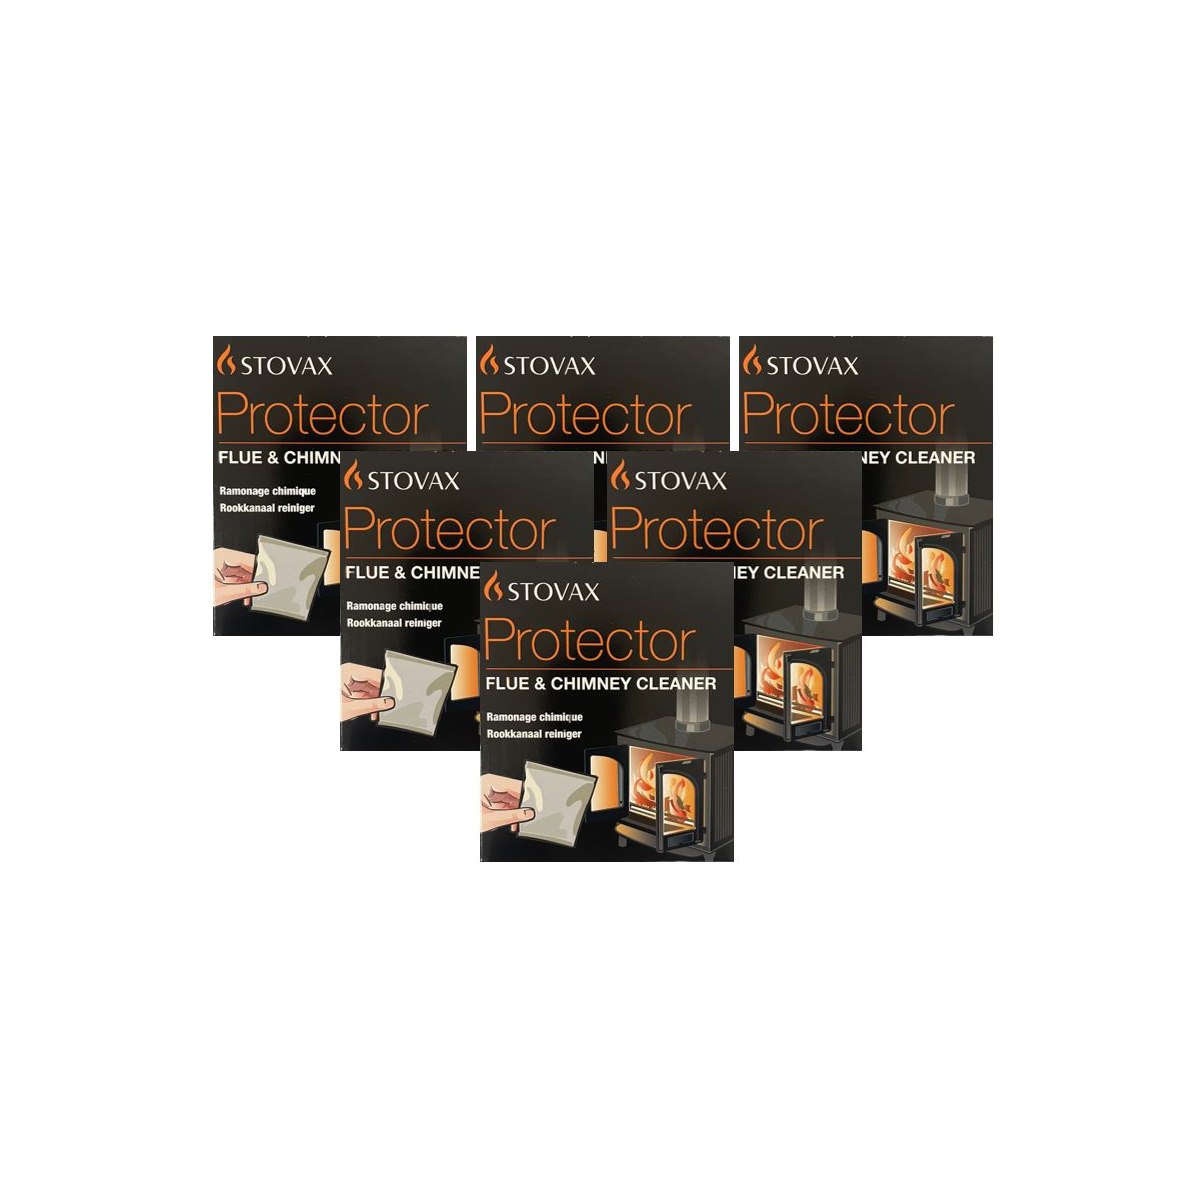 Case of 6 x Stovax Protector Flue and Chimney Cleaner 12 x 40g Sachets